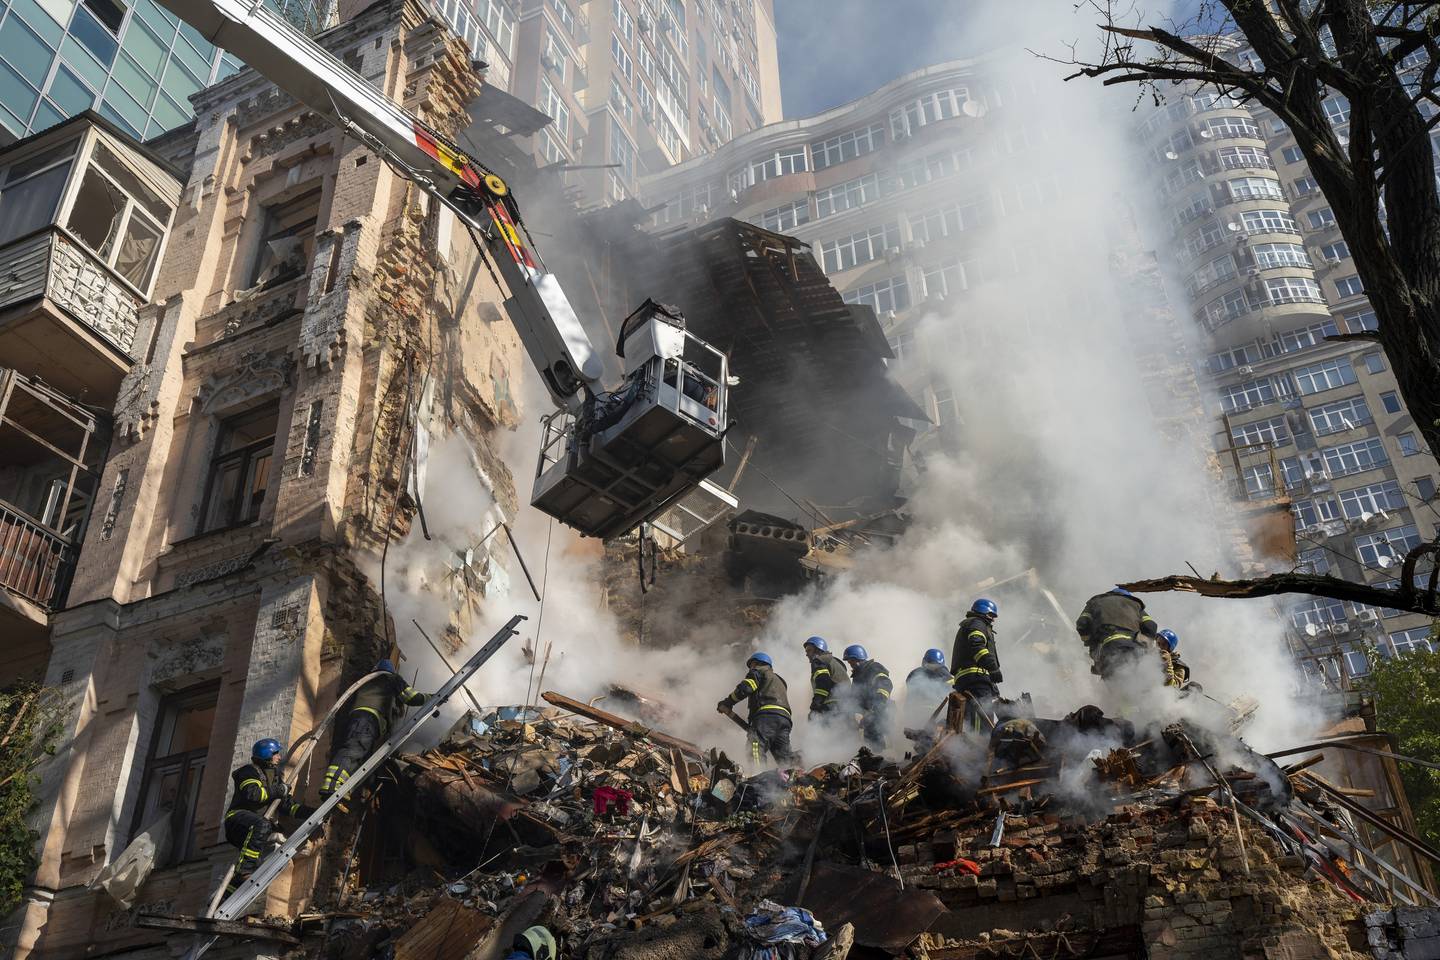 Firefighters work after a drone attack on buildings in Kyiv on October 17. AP